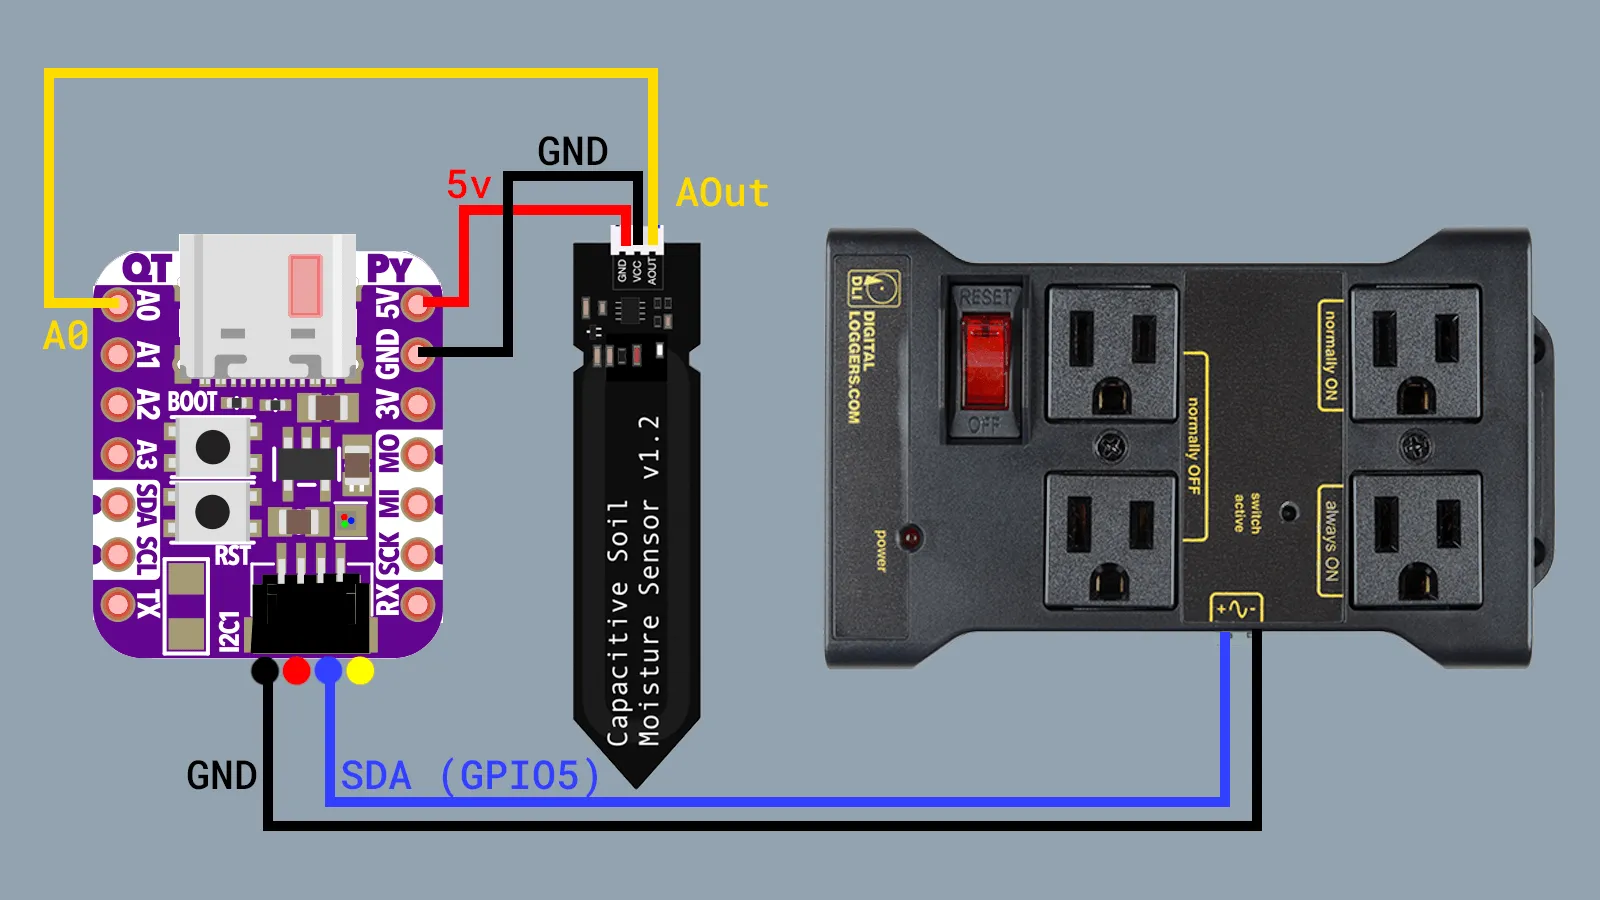 Circuit diagram showing how the QT Py connects to the moisture sensor and smart power relay